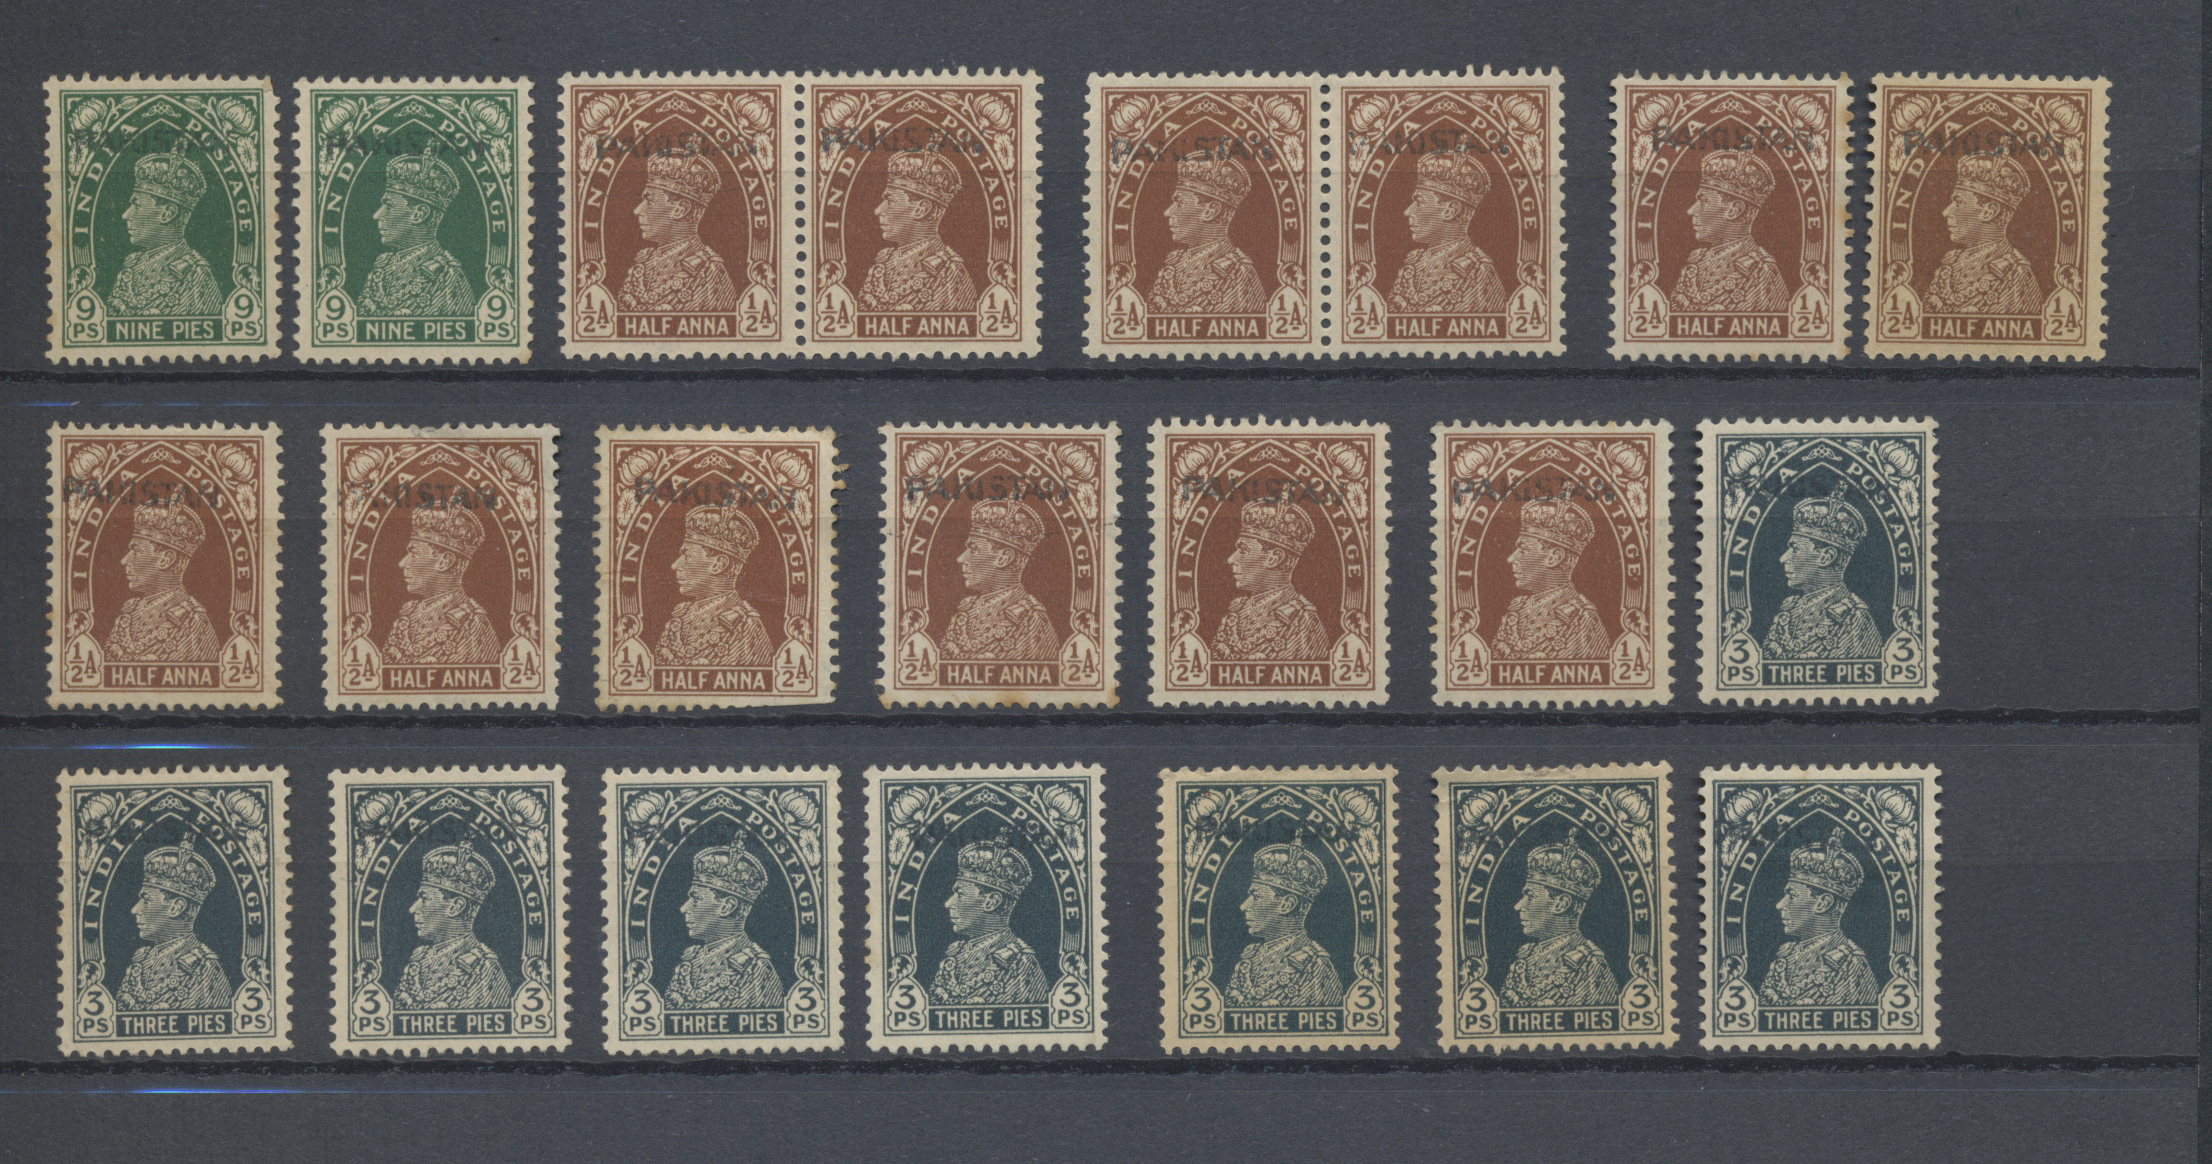 Lot 07593 - pakistan  -  Auktionshaus Christoph Gärtner GmbH & Co. KG 56th AUCTION - Day 4